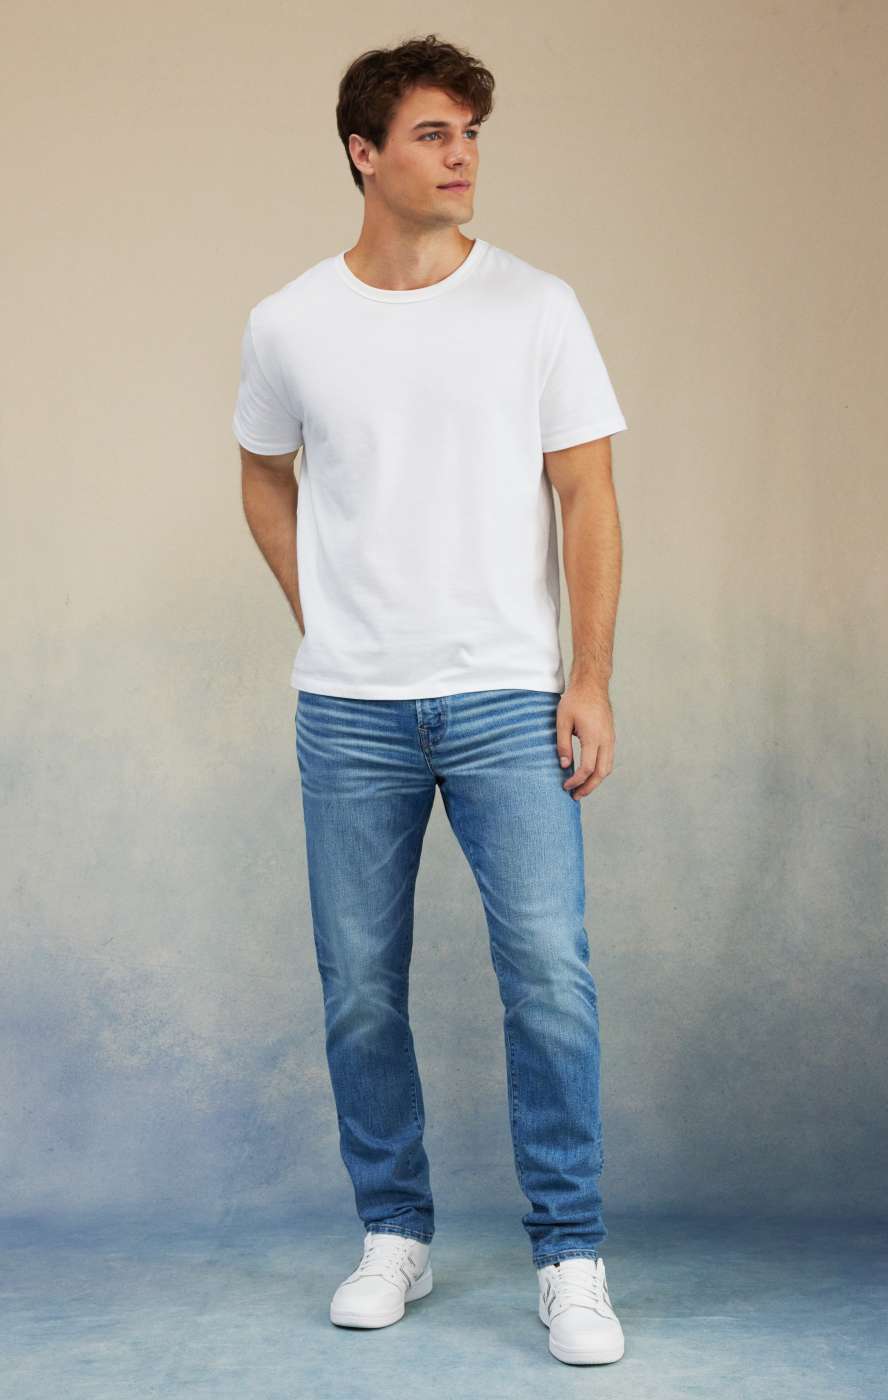 Men's Jeans: Slim, Relaxed, Athletic, Skinny & More | American Eagle